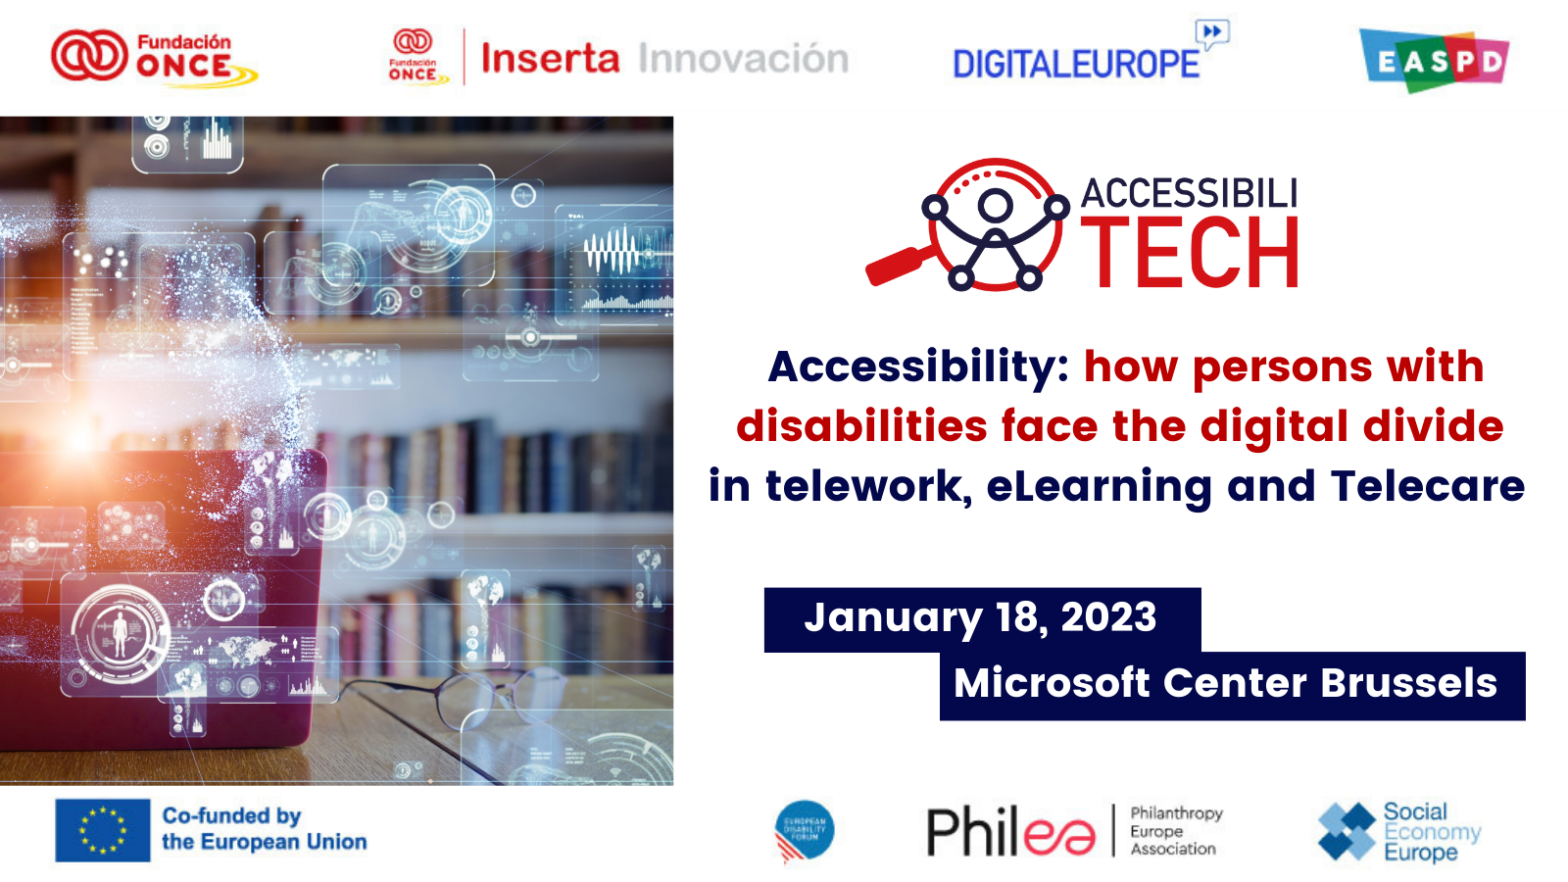 Creative for the final conference with the text Accessibility: how persons with disabilities face the digital divide in telework, elearning and telecare